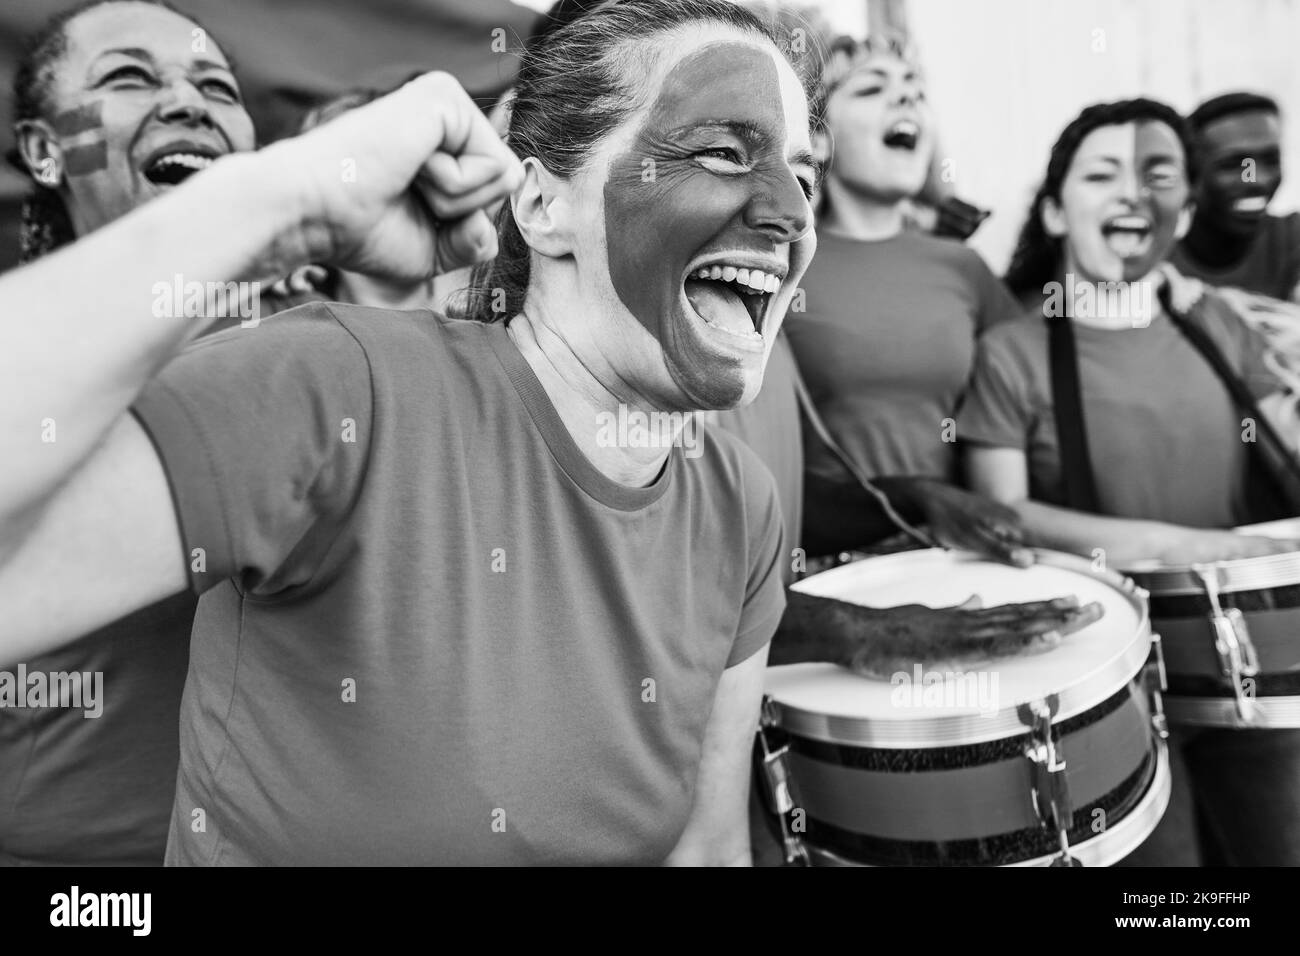 Sport fans screaming while supporting their team - Football supporters having fun at competition event - Focus on mature woman face - Black and white Stock Photo